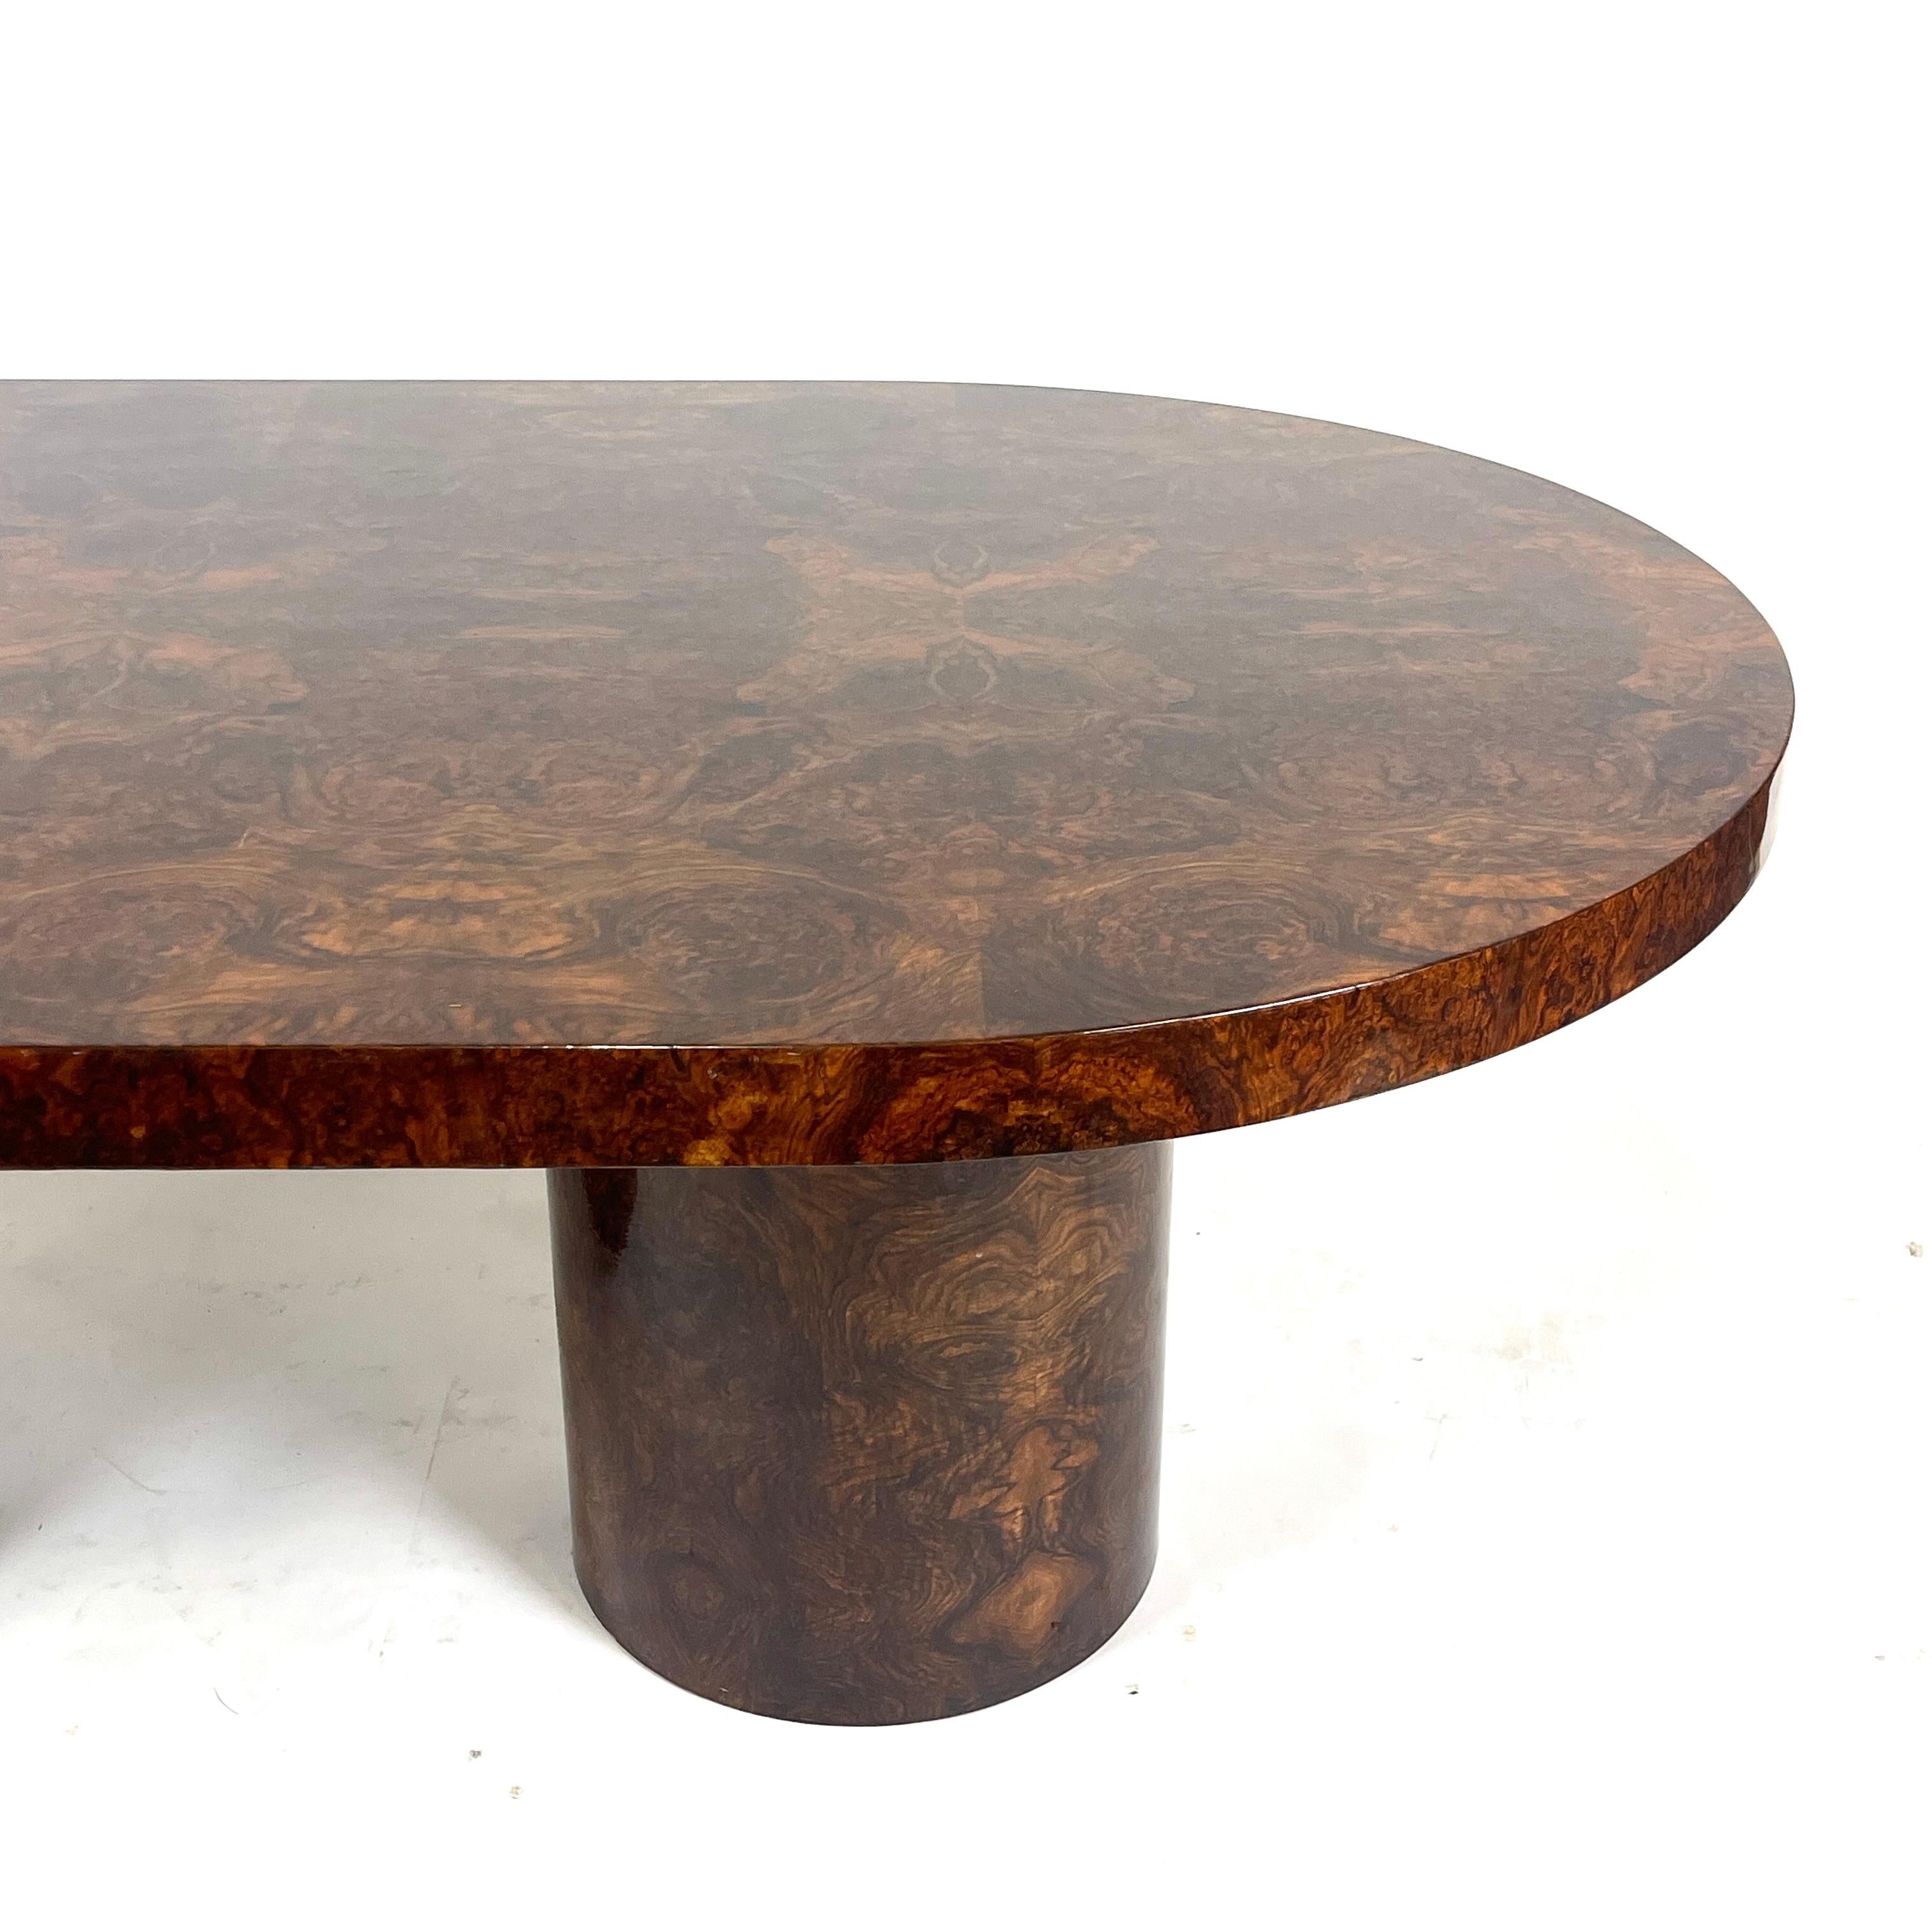 Lacquered Burled Mahogany Oval Dining Table by Paul Mayen for Intrex Habitat 7